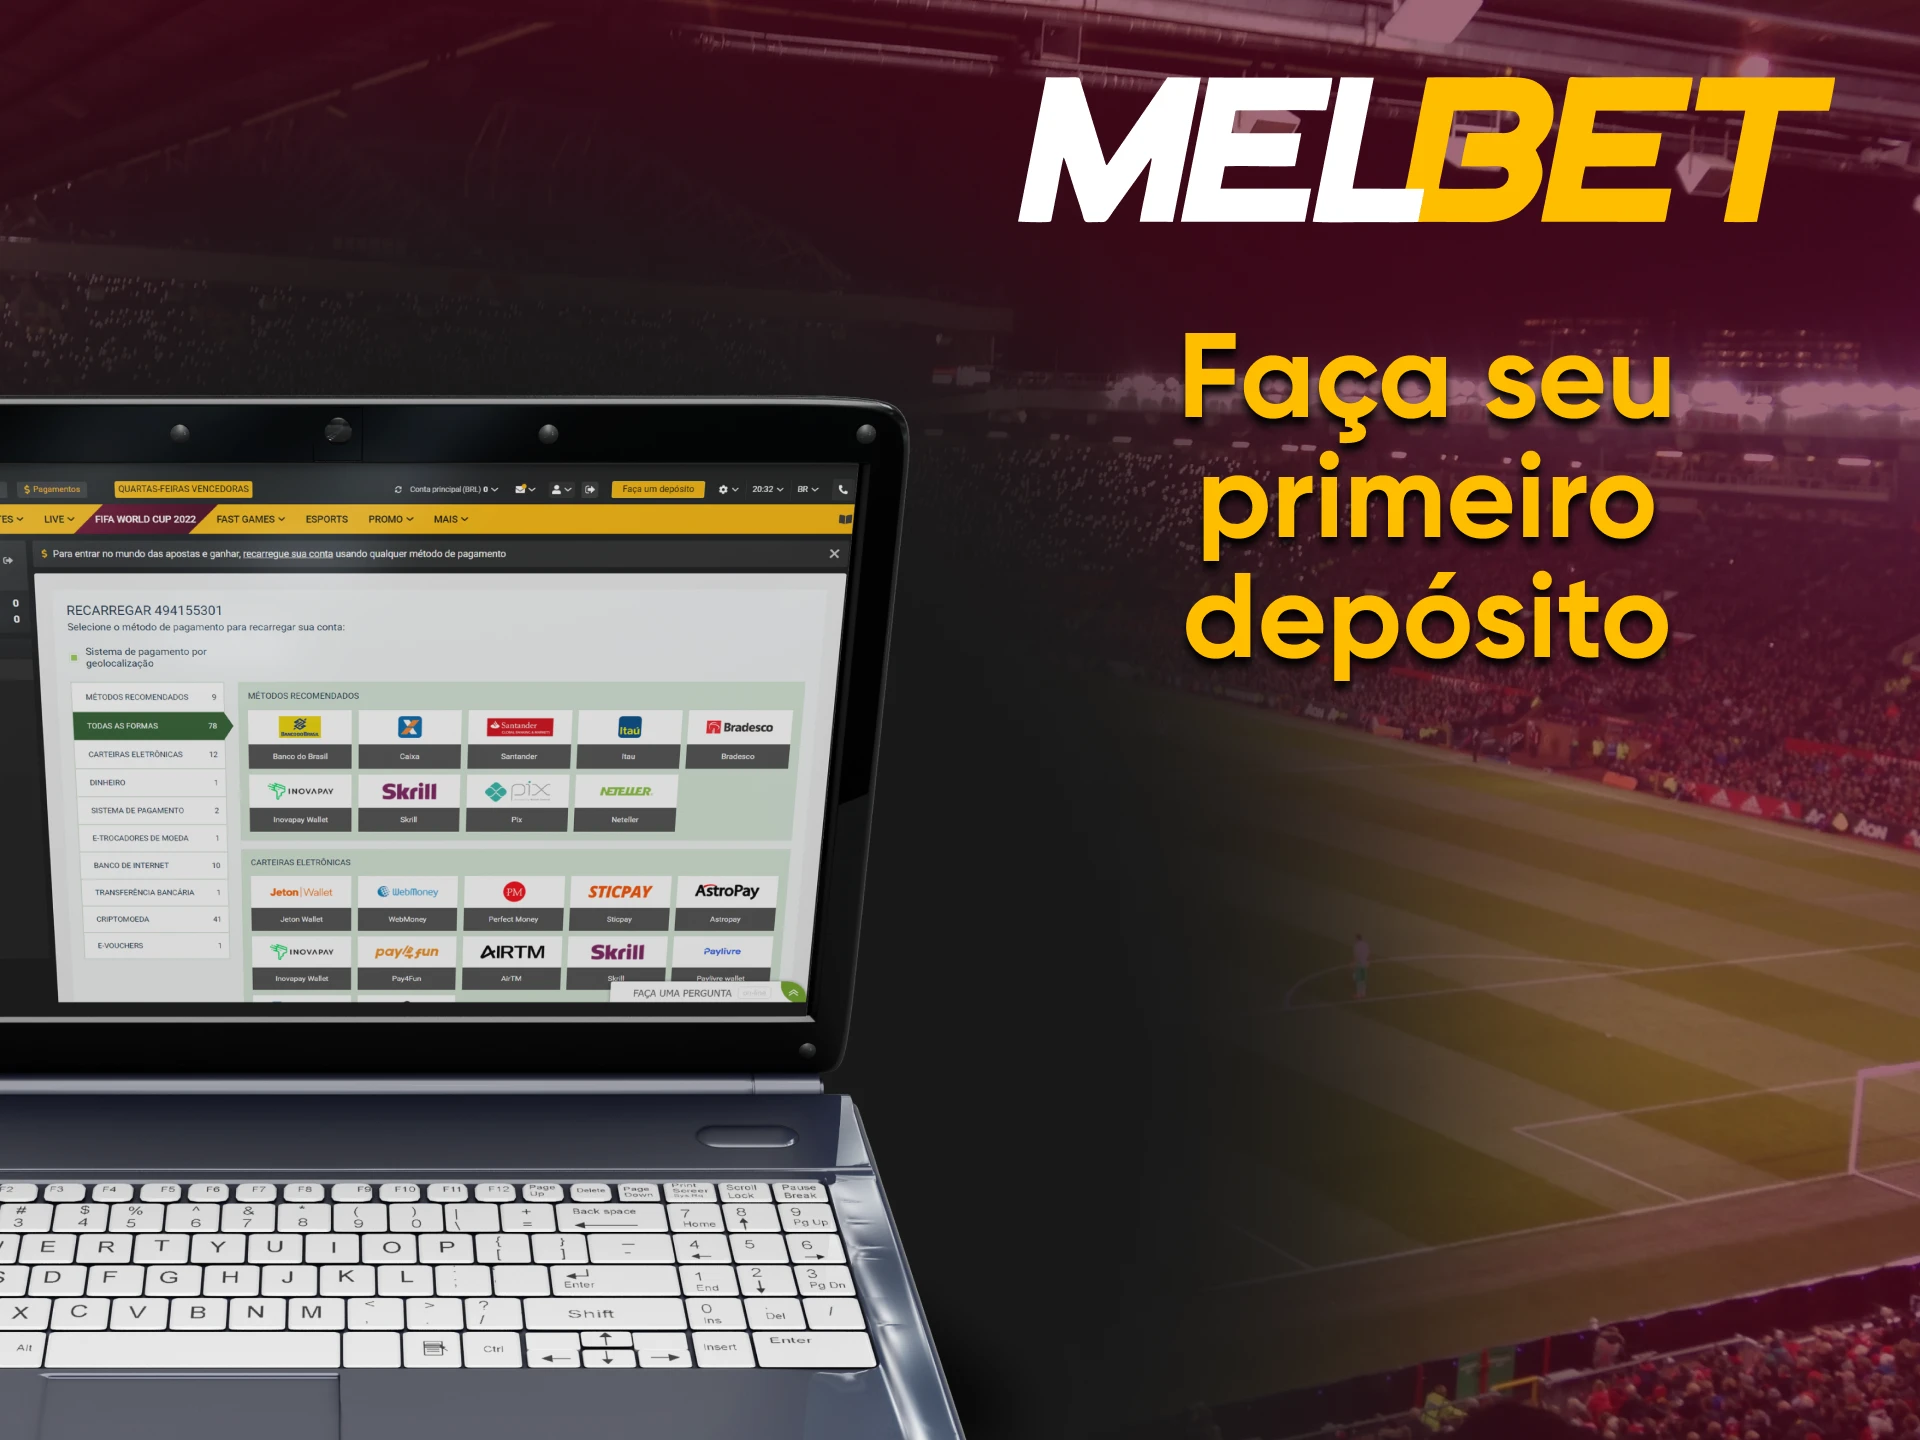 Make a deposit if you want to place bets or play at Melbet casino.